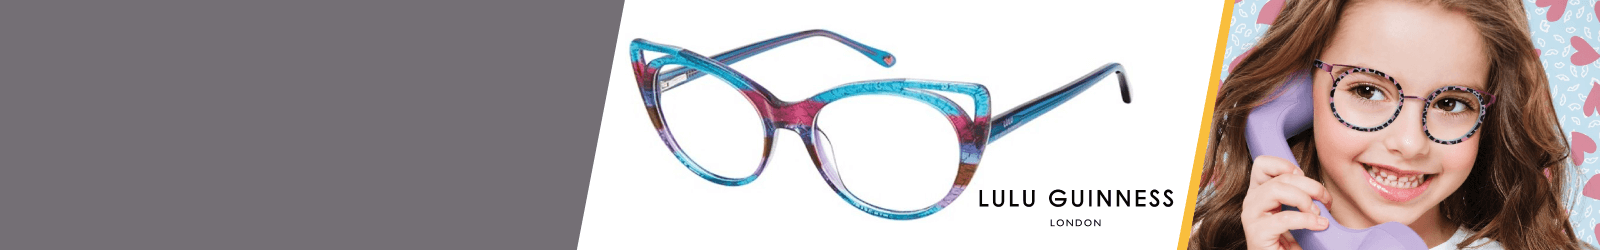 White Lulu Guinness Kids Glasses from 2 to 4-year-old